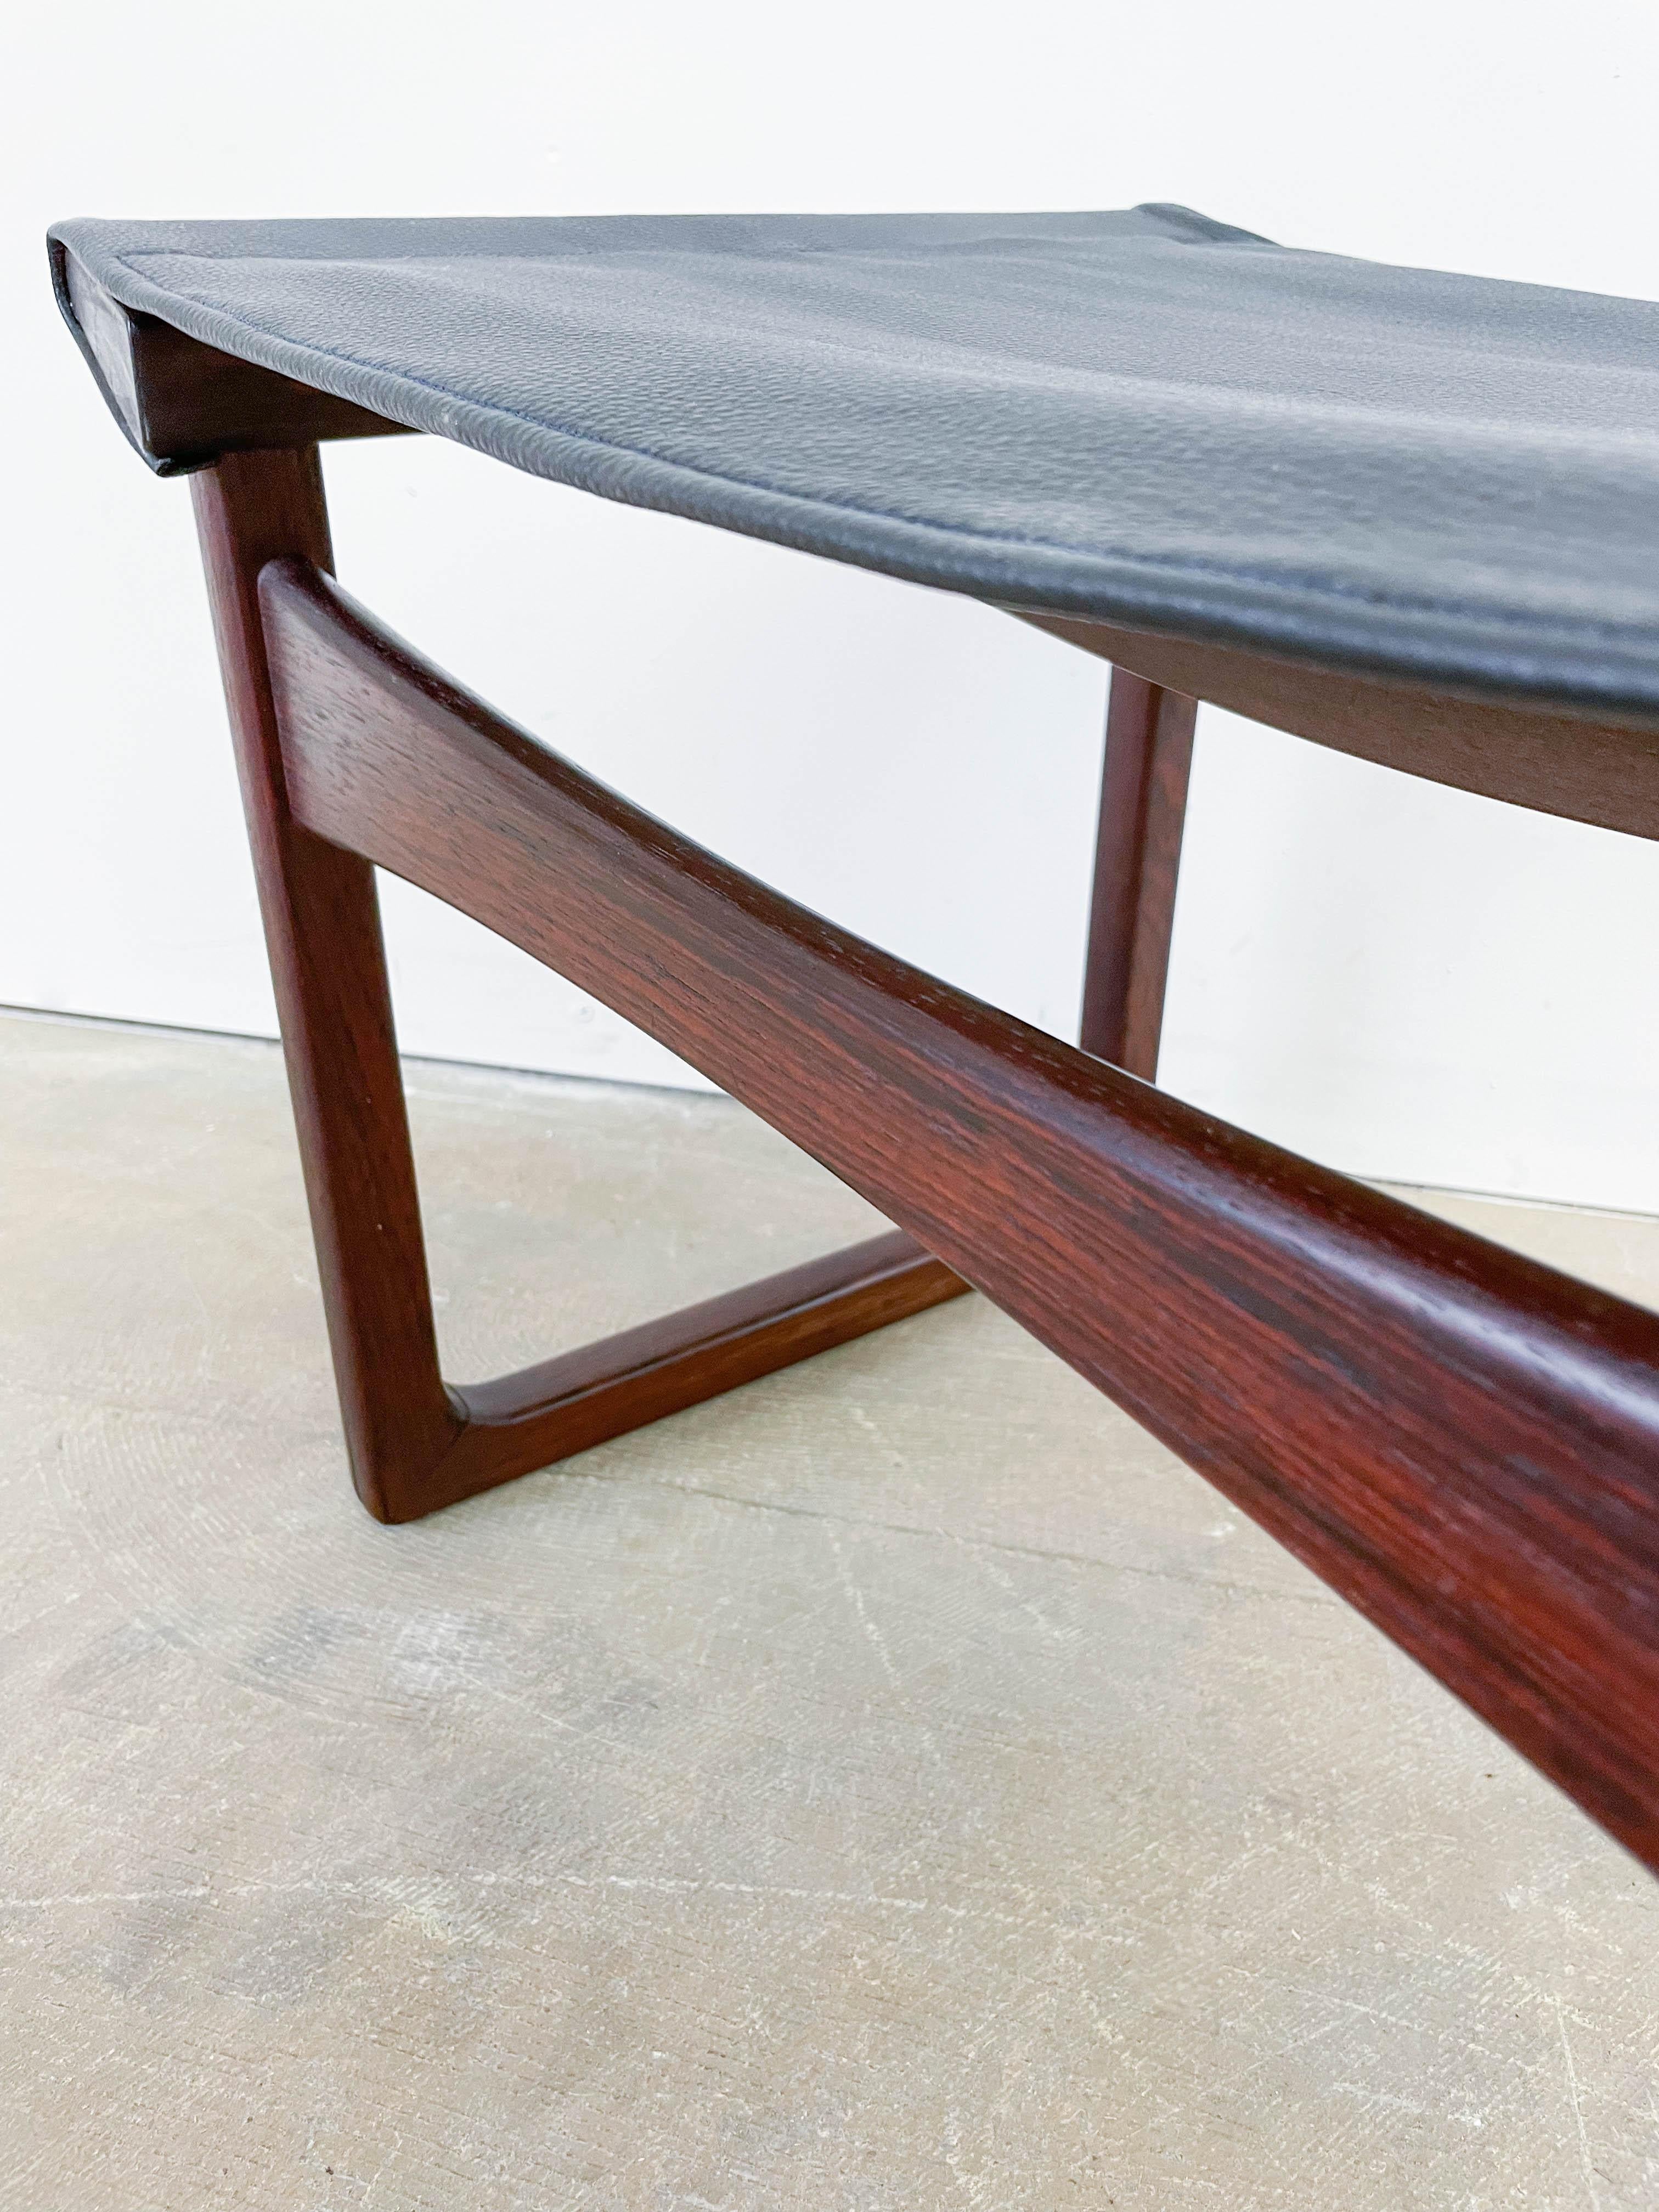 20th Century Rosewood and Leather Footstool by Madsen & Larson For Pontoppidan For Sale